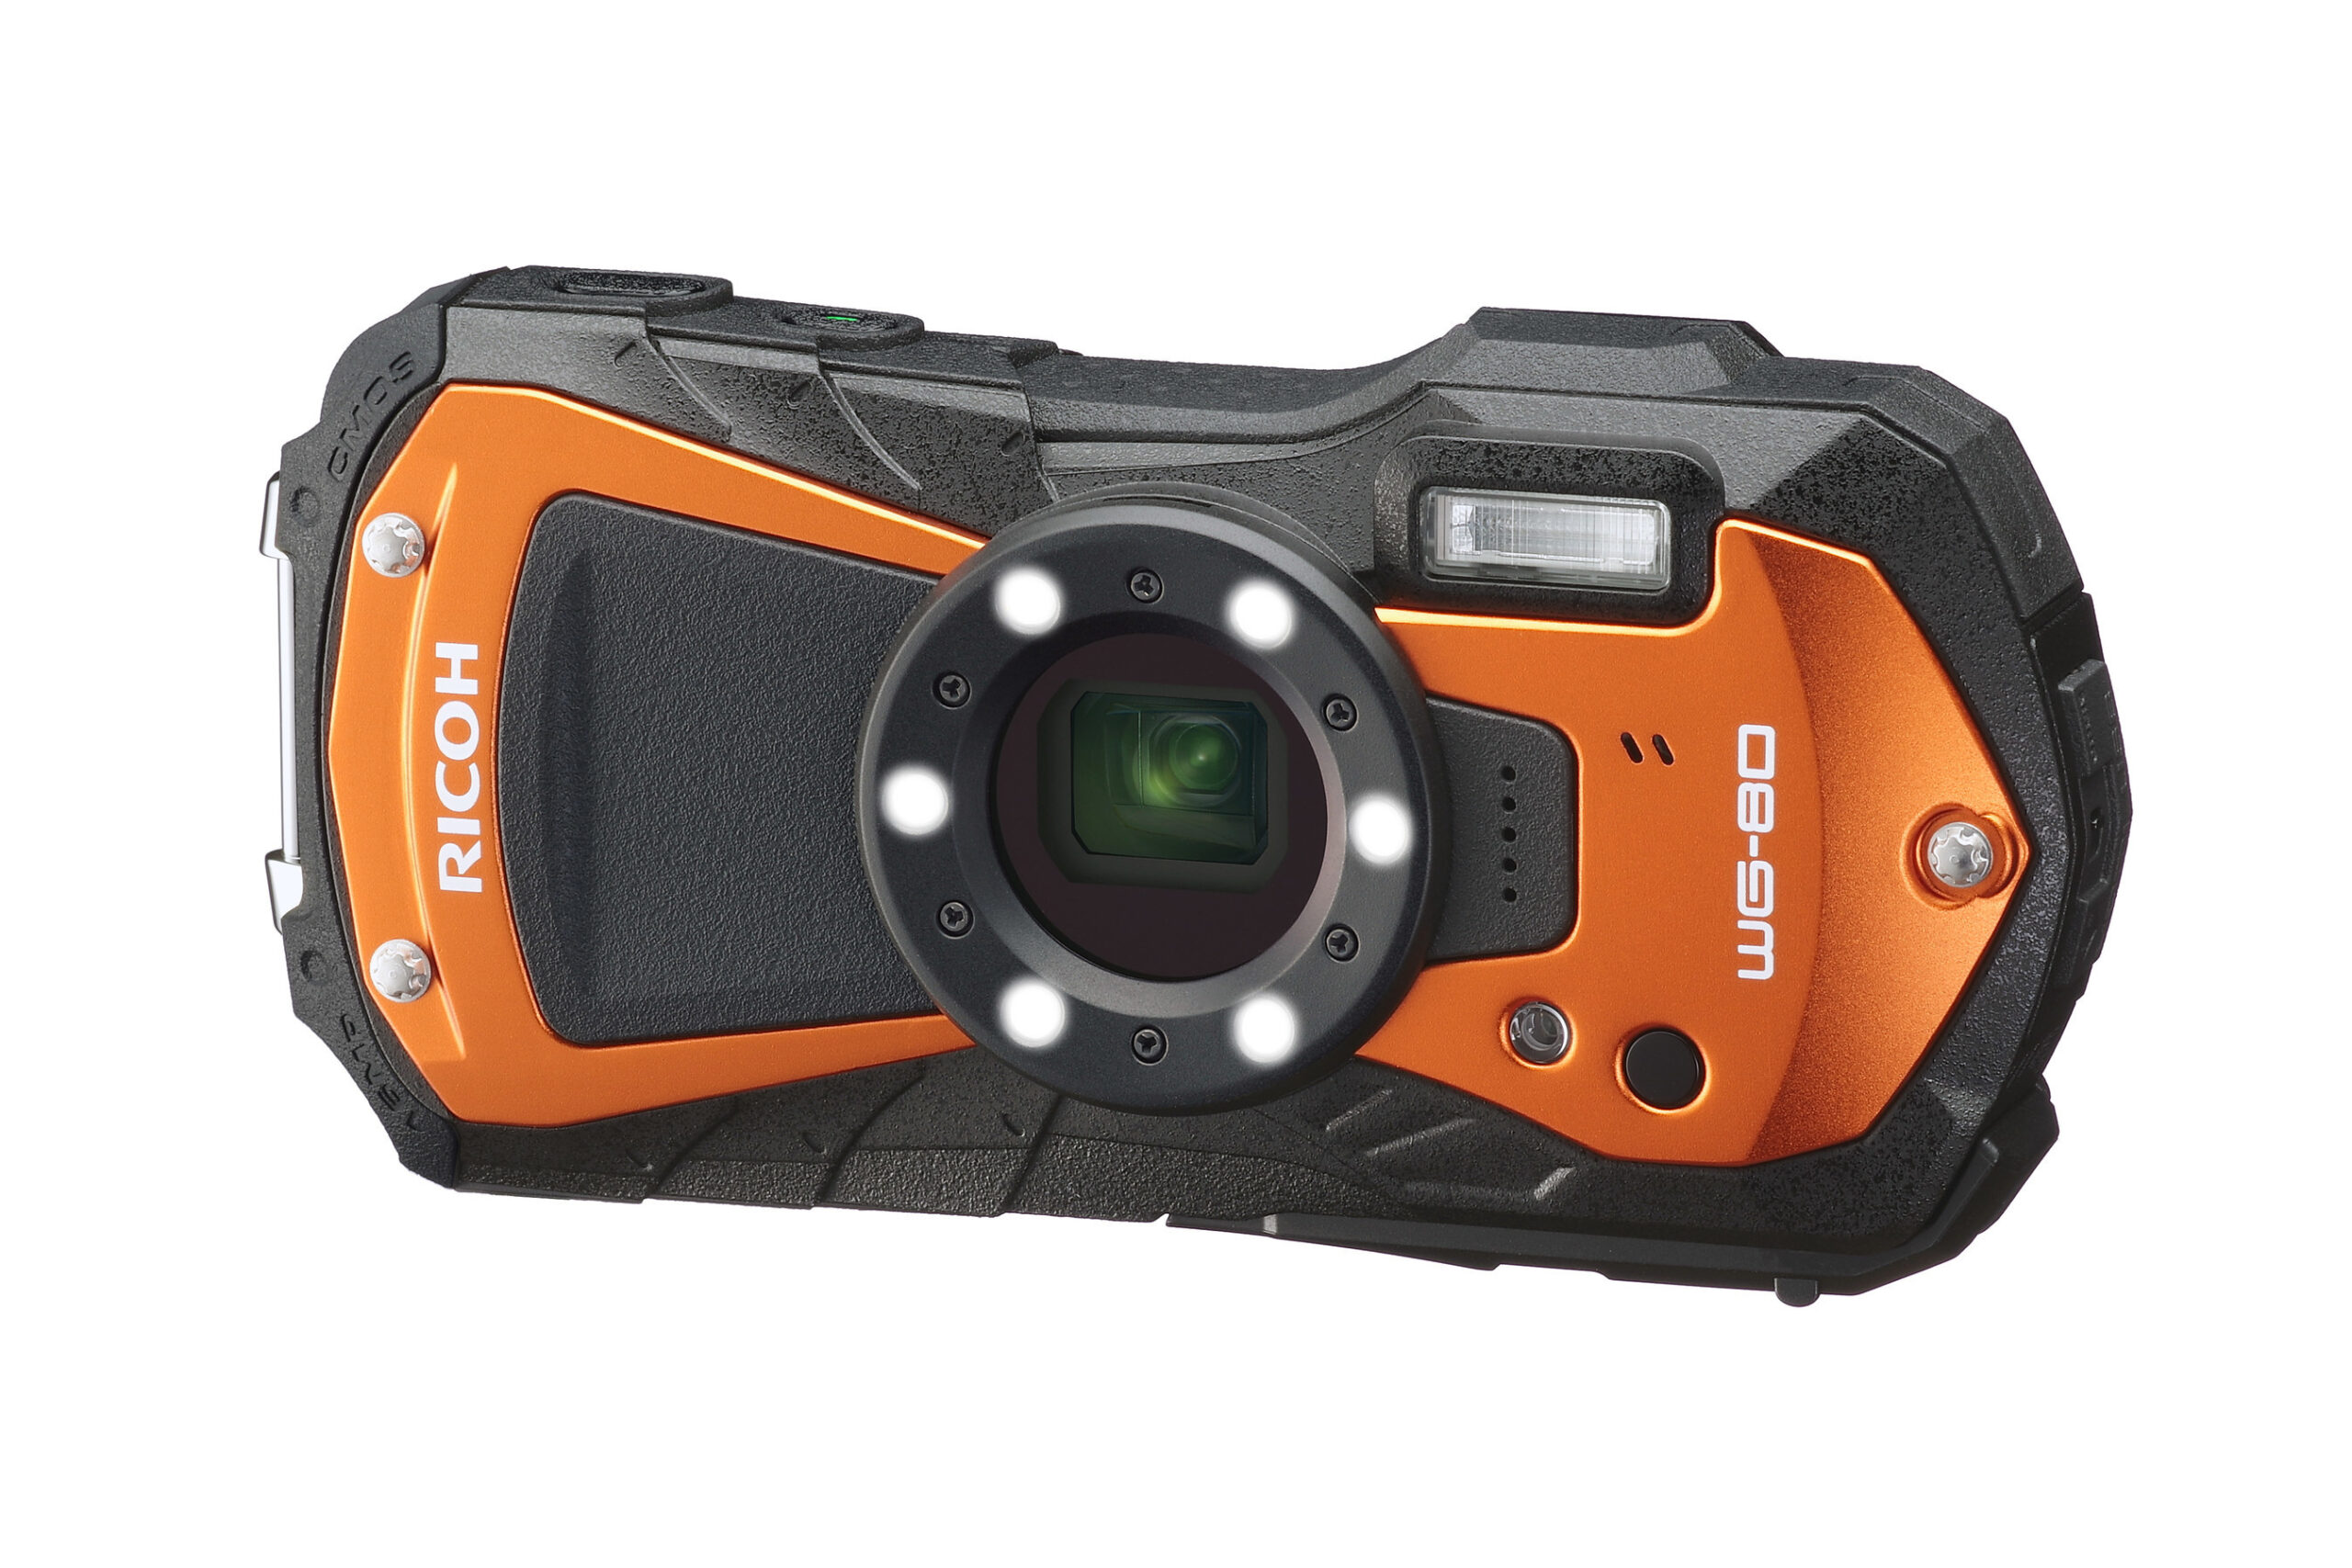 Ricoh announces rugged, waterproof WG series digital compact camera for underwater, outdoor and industrial photography